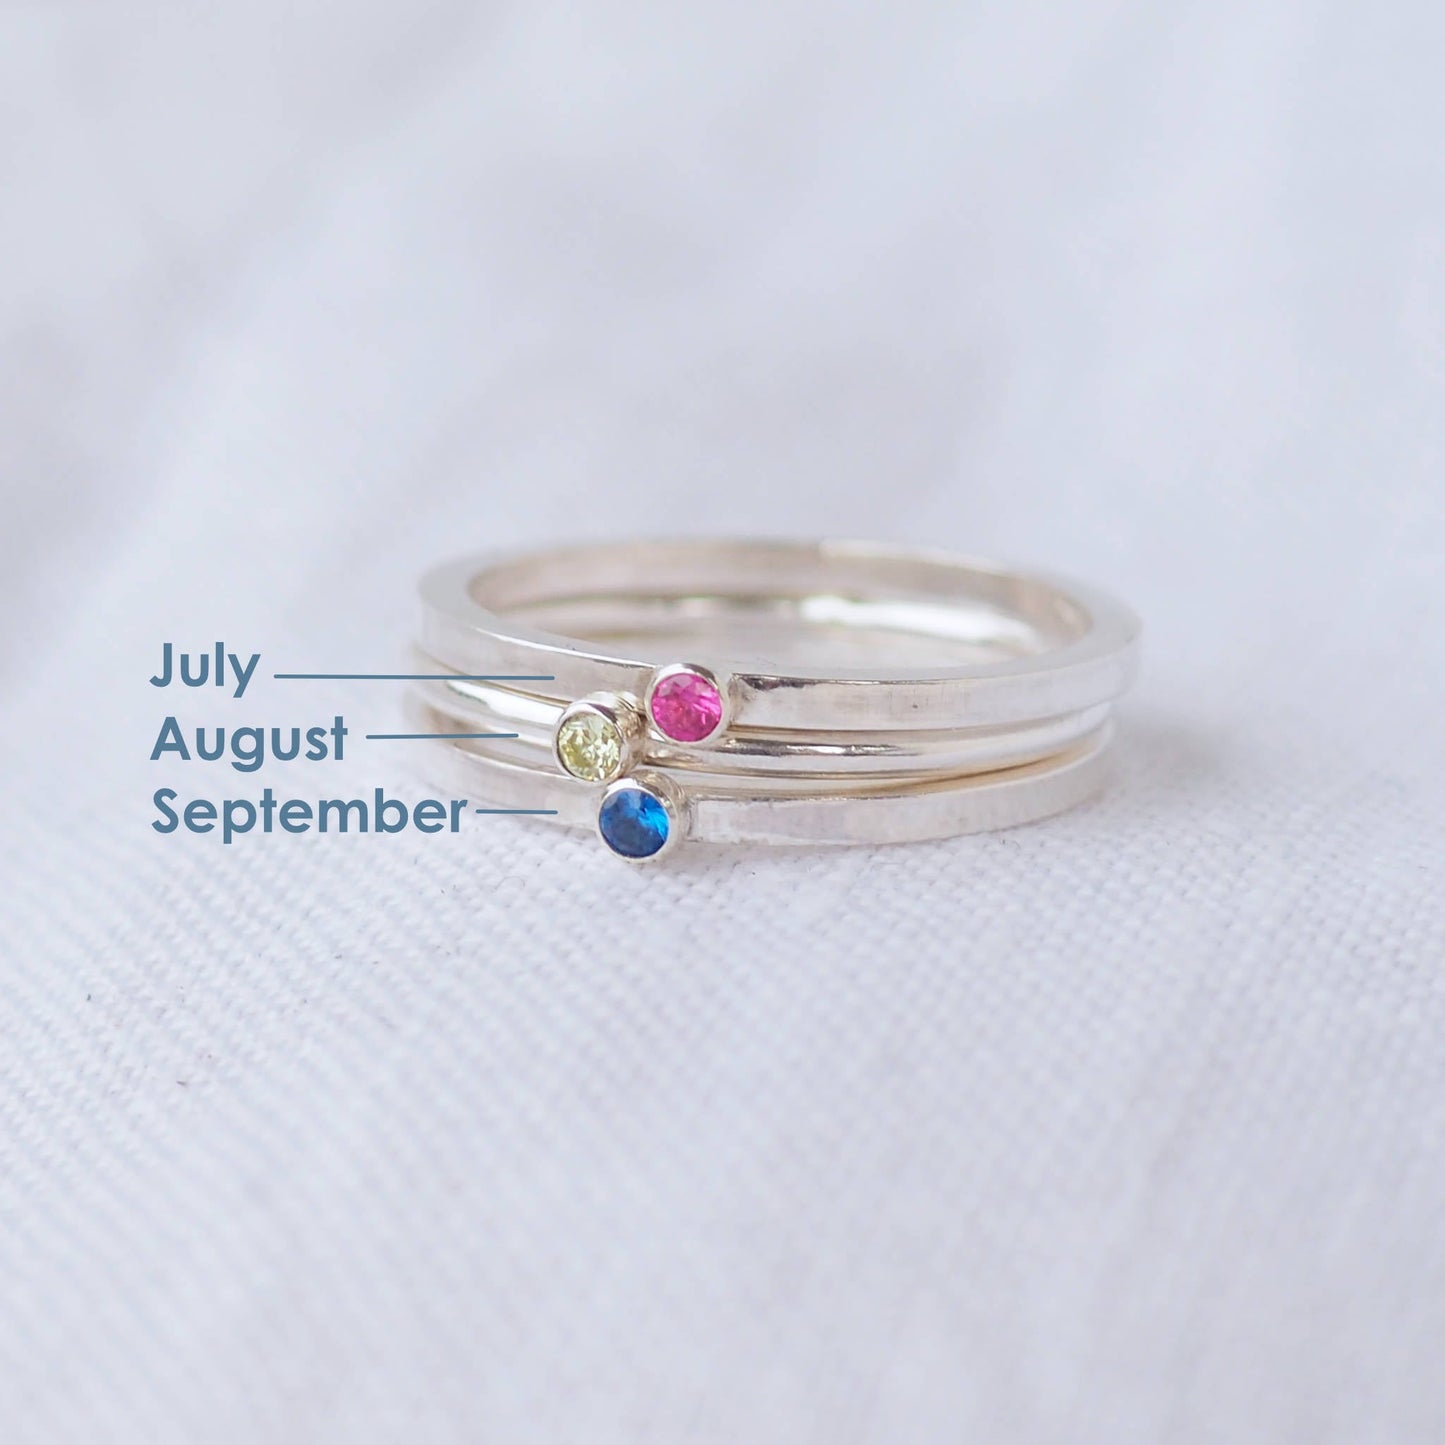 Three silver rings showing July,August and September  Birthstones. The rings are simple silver bands with a miniature birthstone on the band in pink,moss green and blue cubic zirconia. Handmade in Edinburgh by maram jewellery